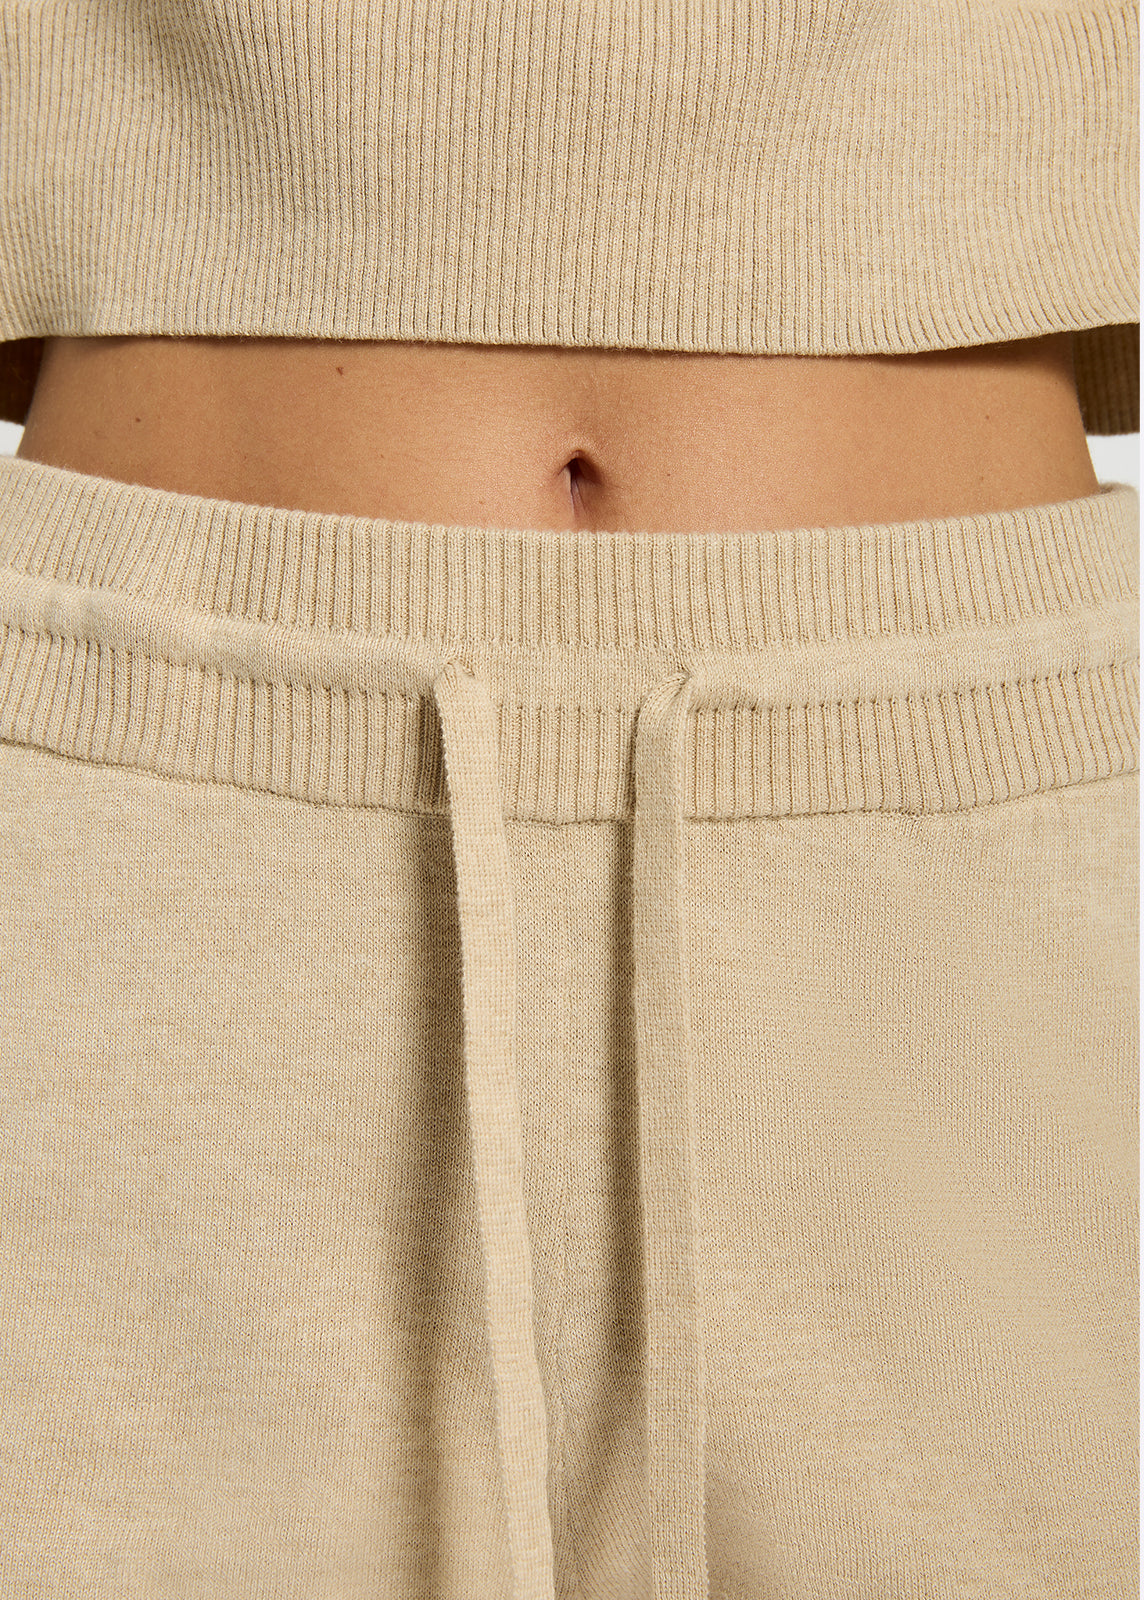 Close up of model wearing oatmeal coloured knit shorts with mid-thigh length, pockets showing the waistband with drawstring detail.